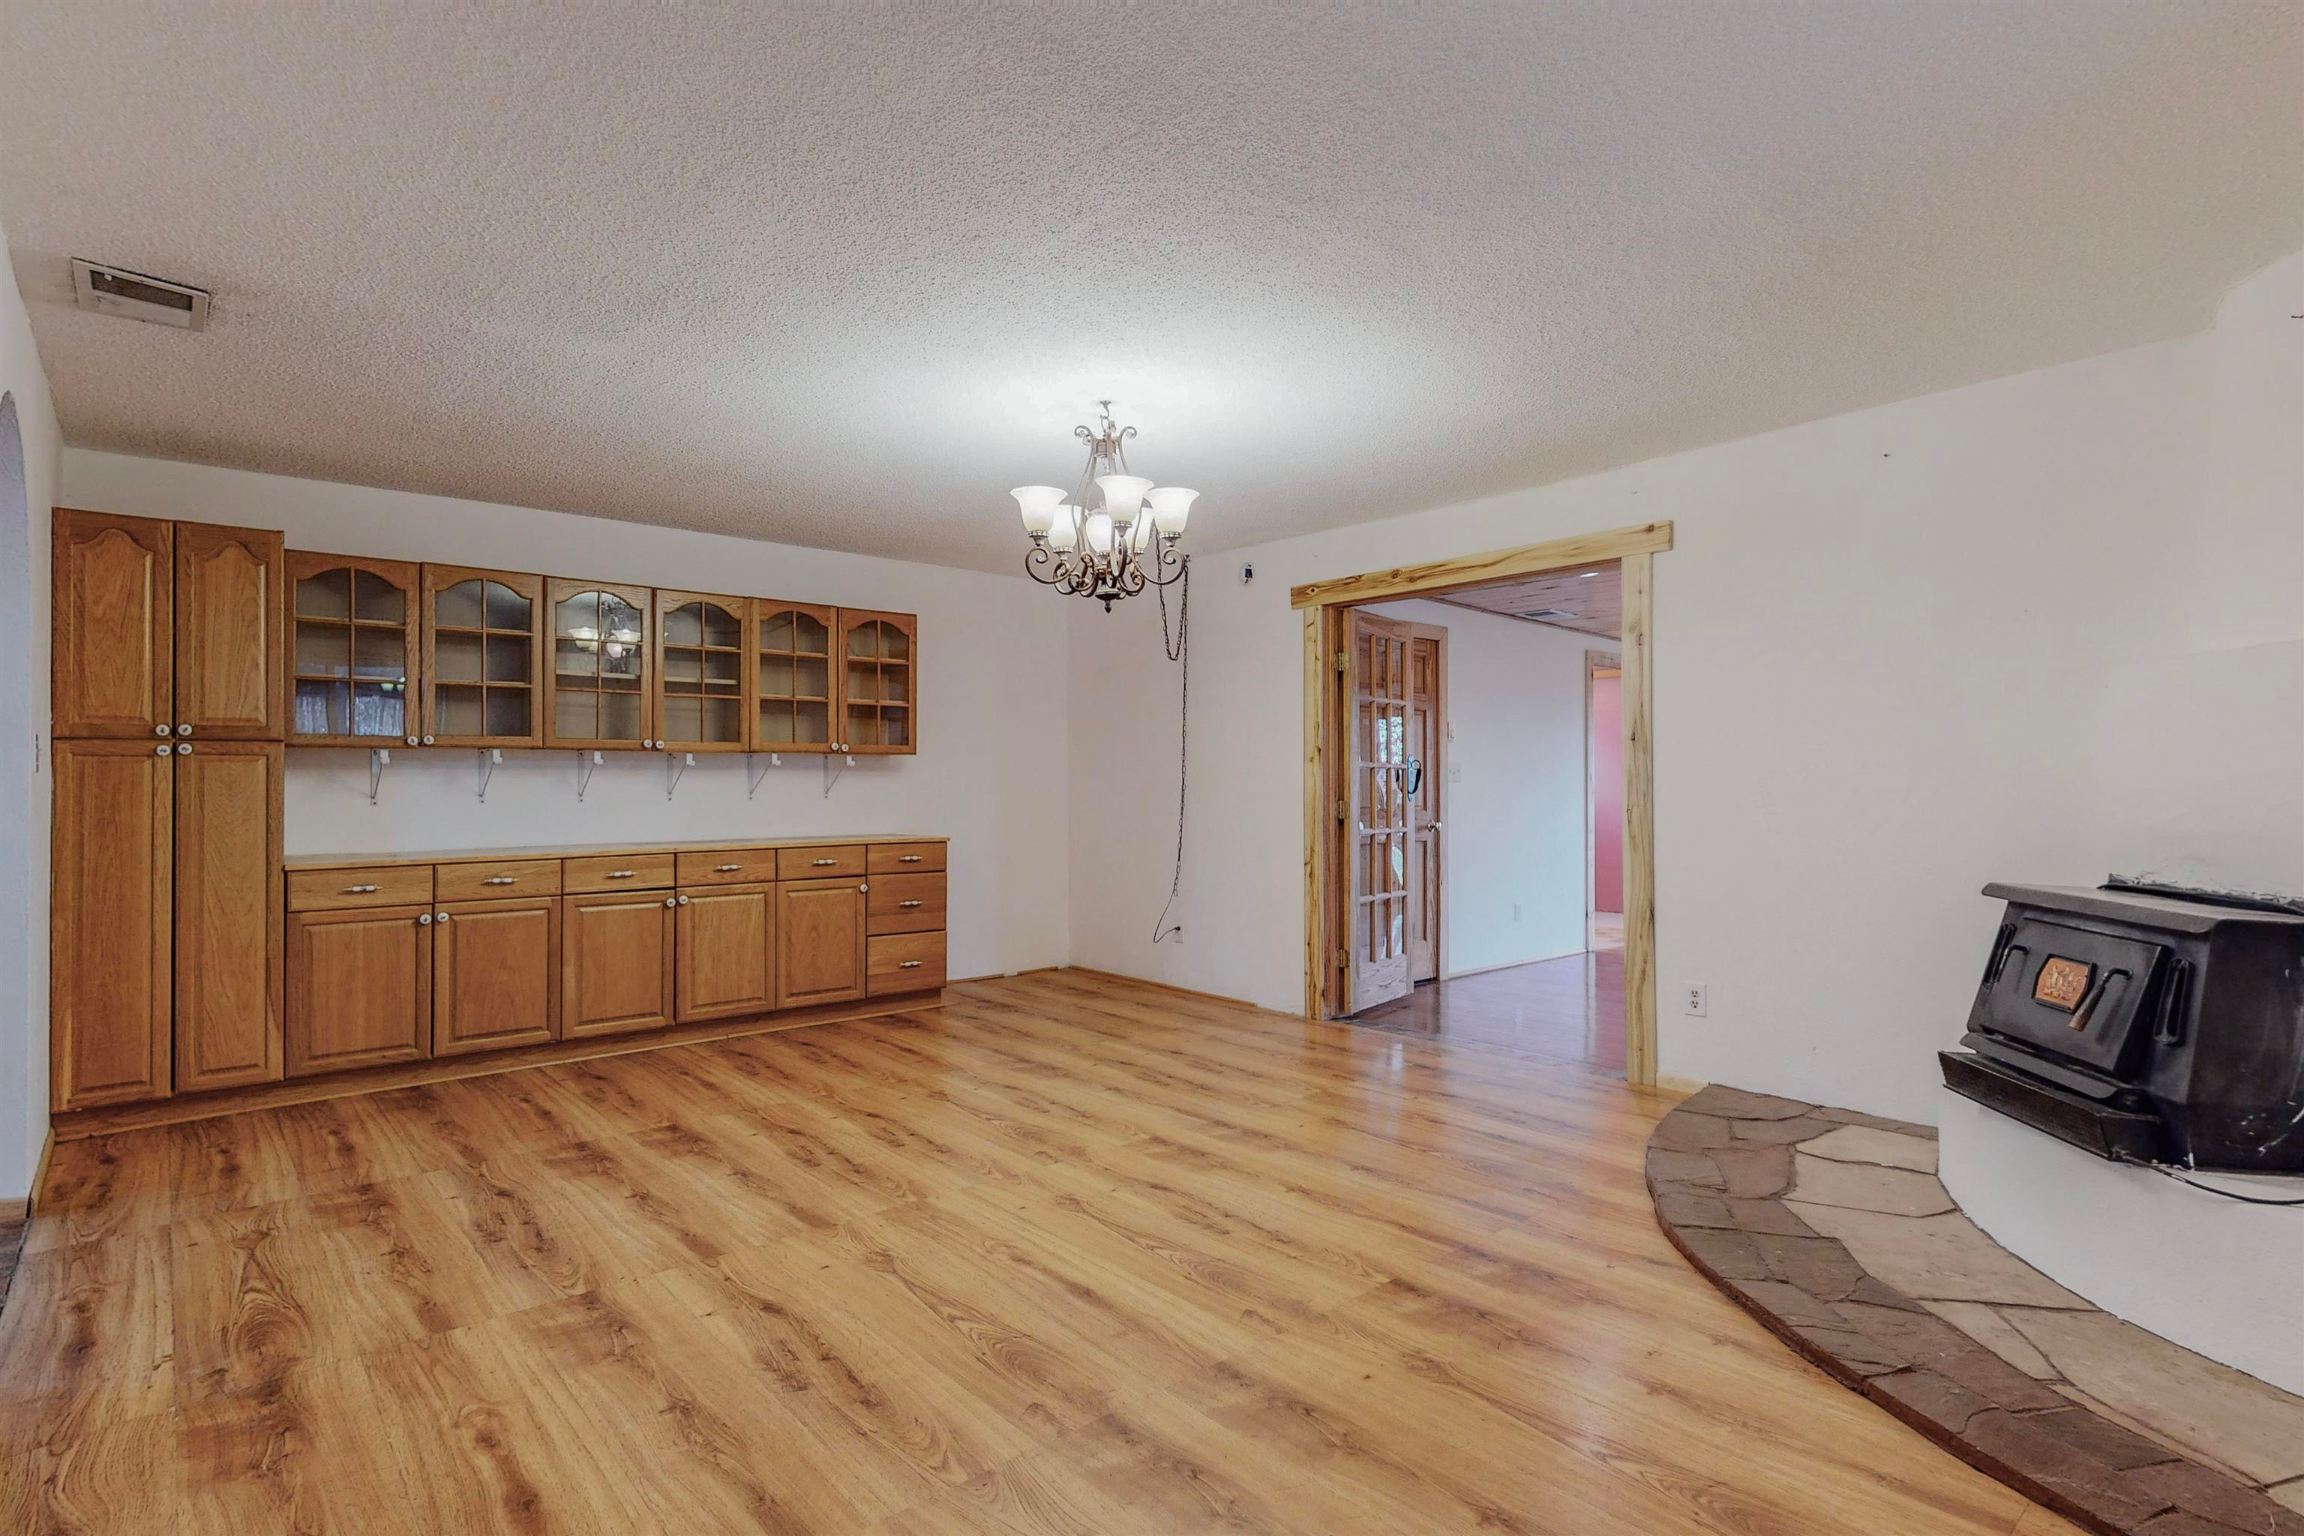 See next Photo for Virtual staging